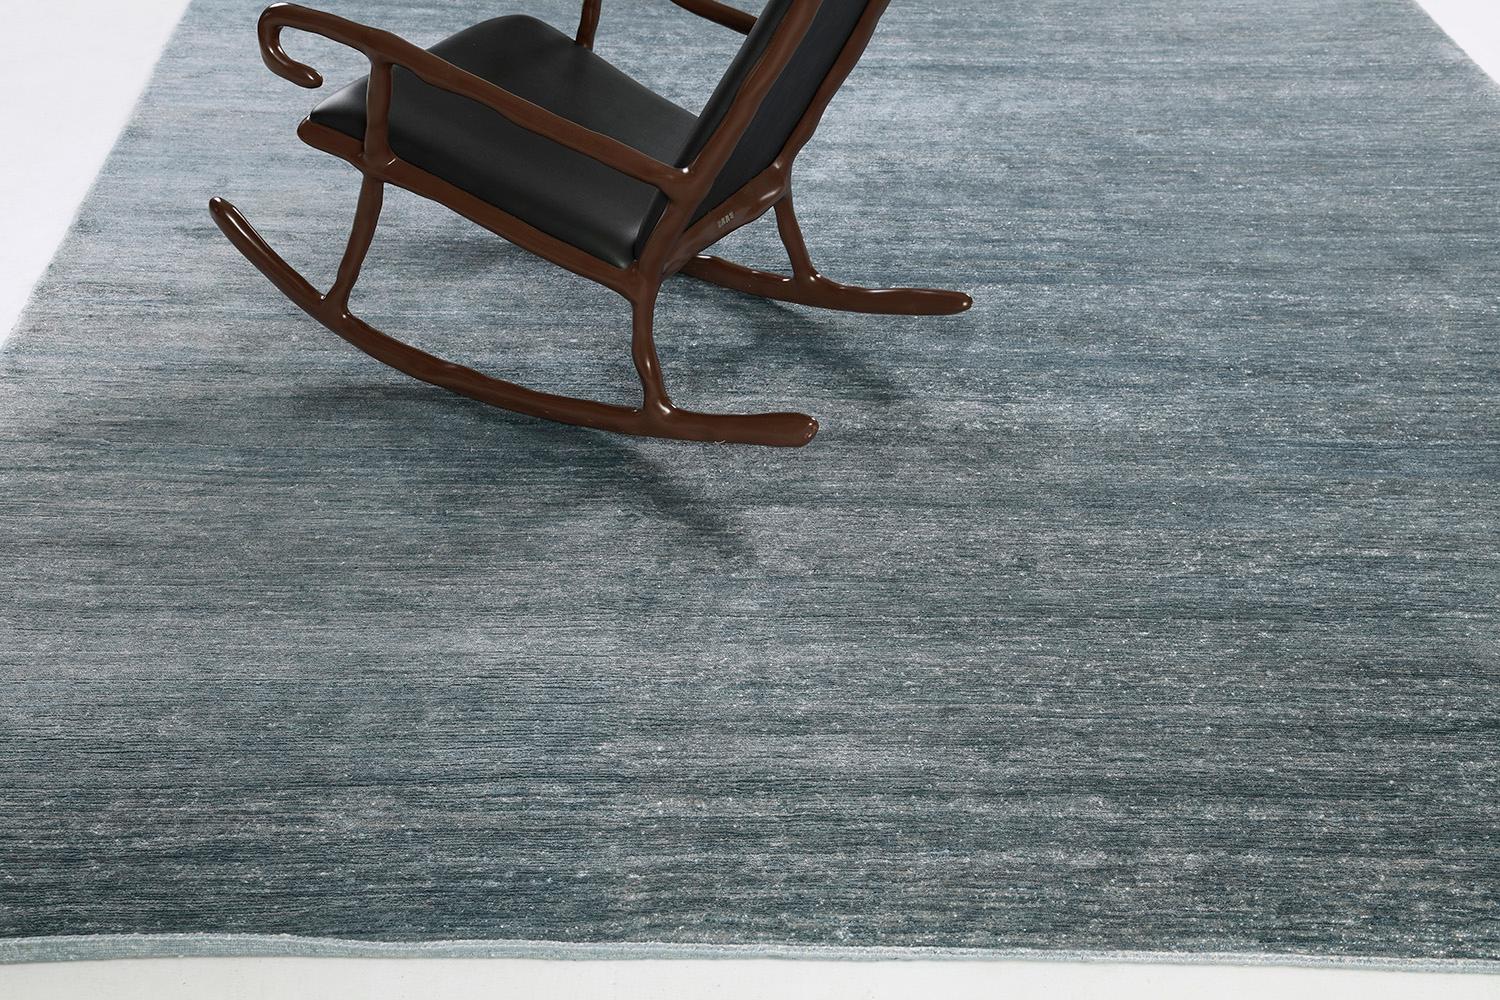 Dara' is a most sought after rug in Elan Collection in the mesmerizing shade of sky blue. Its simplicity does not take away from the rug's luxurious quality and beautiful sheen made of bamboo silk. Dara is a fabulous rug for any design space.

Rug